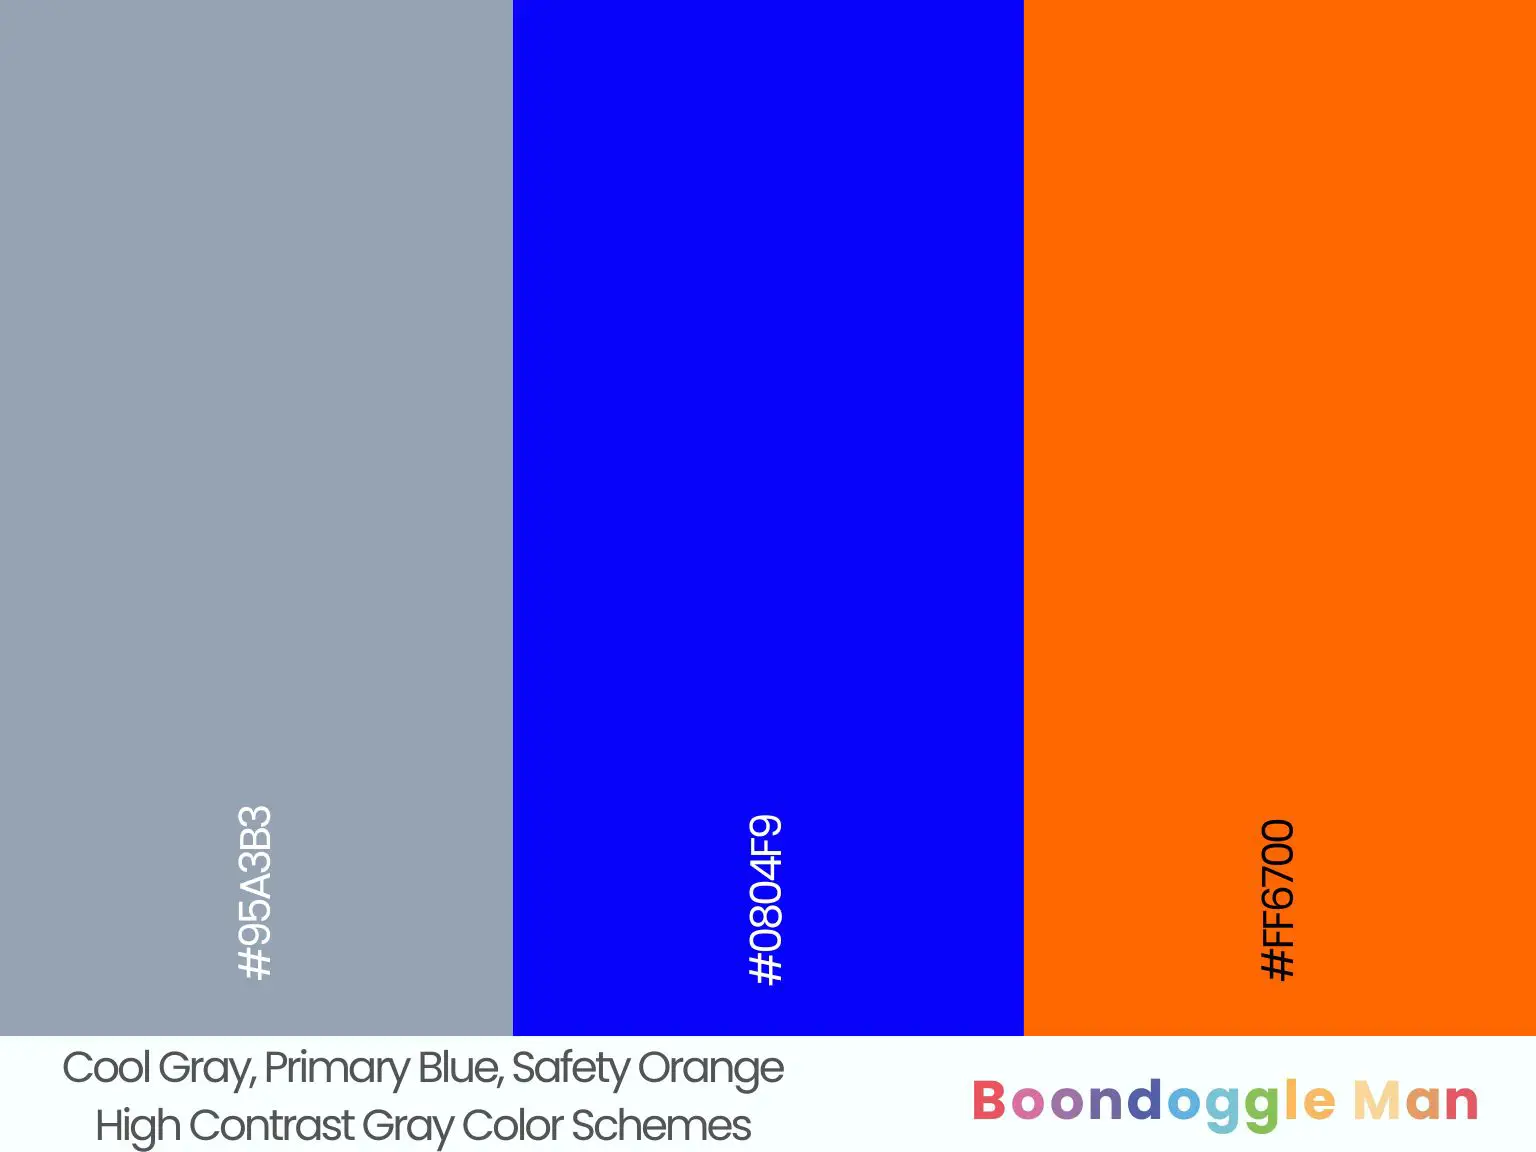 Cool Gray, Primary Blue, Safety Orange